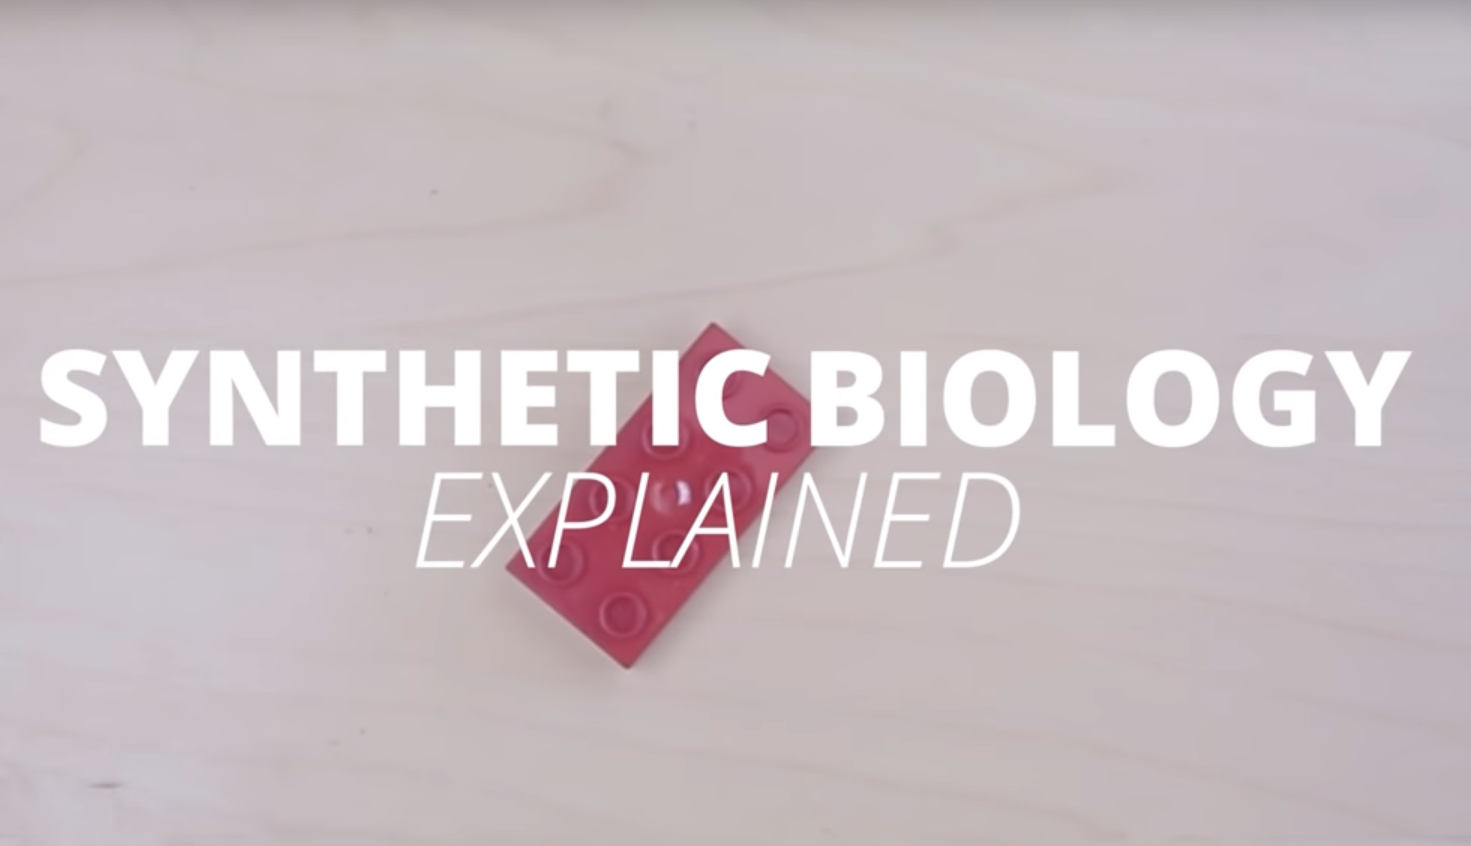 Synthetic biology, explained